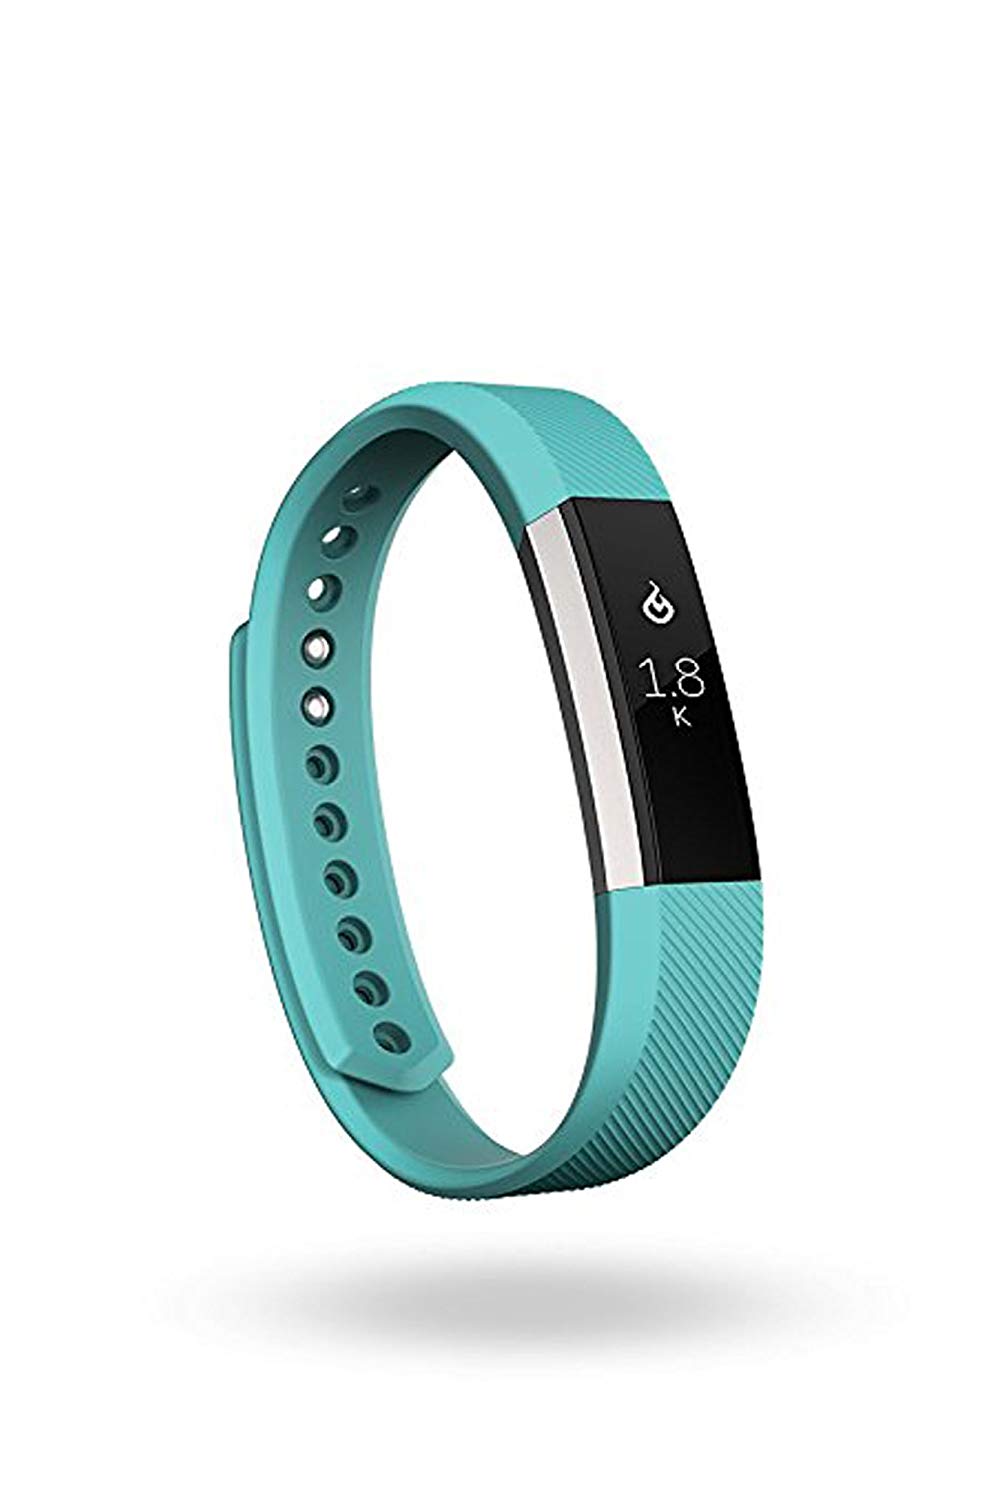 Fitbit Alta Fitness Tracker Wrist Band, Silver/Teal, Small (5.5 - 6.7 Inch) (US Version)